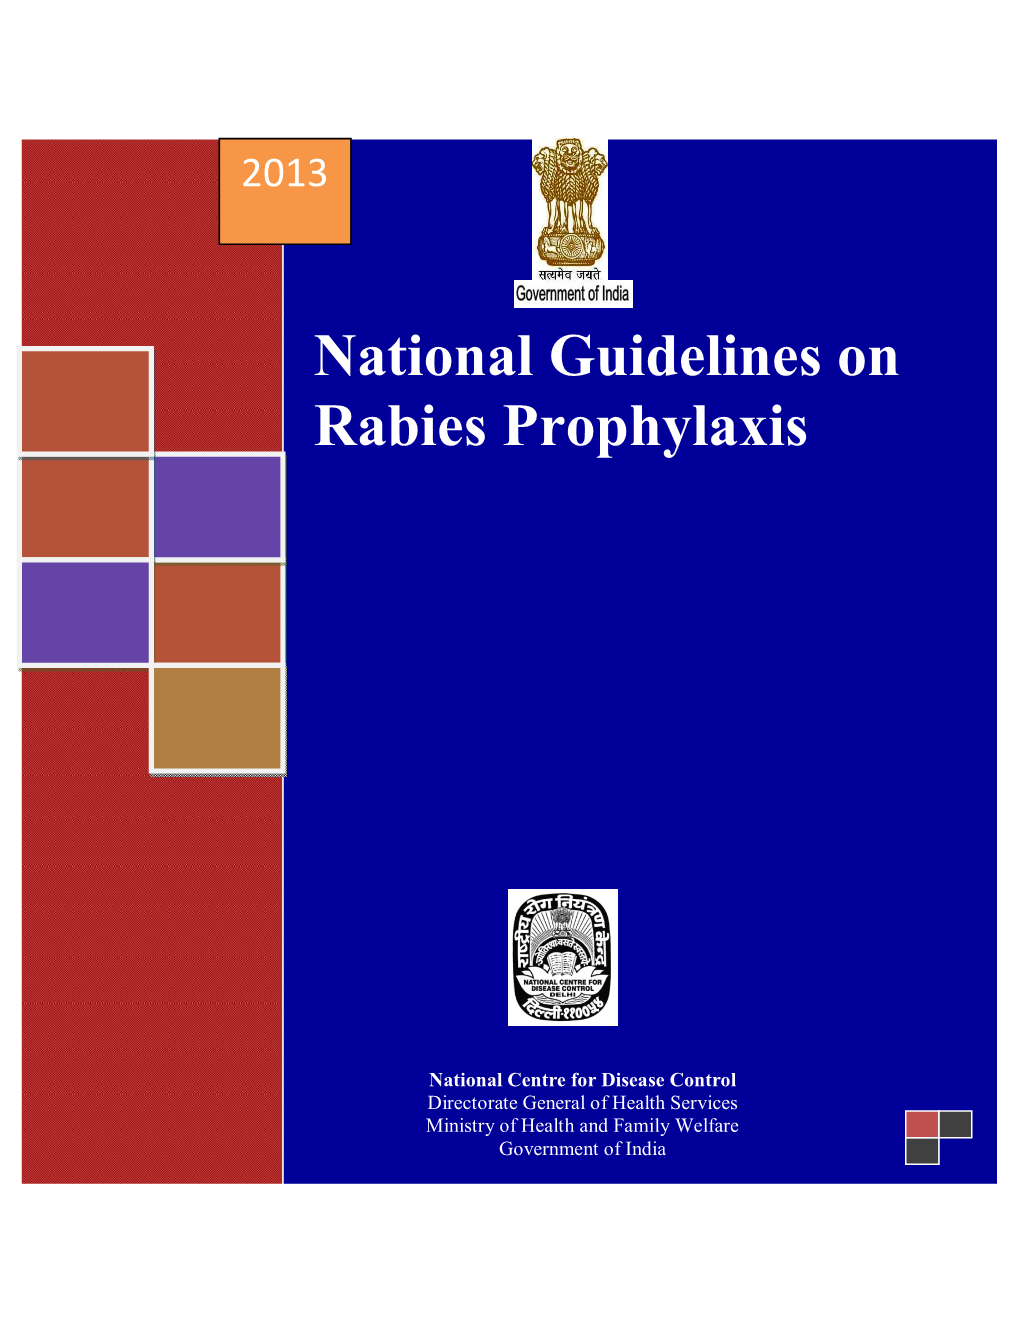 National Guidelines on Rabies Prophylaxis